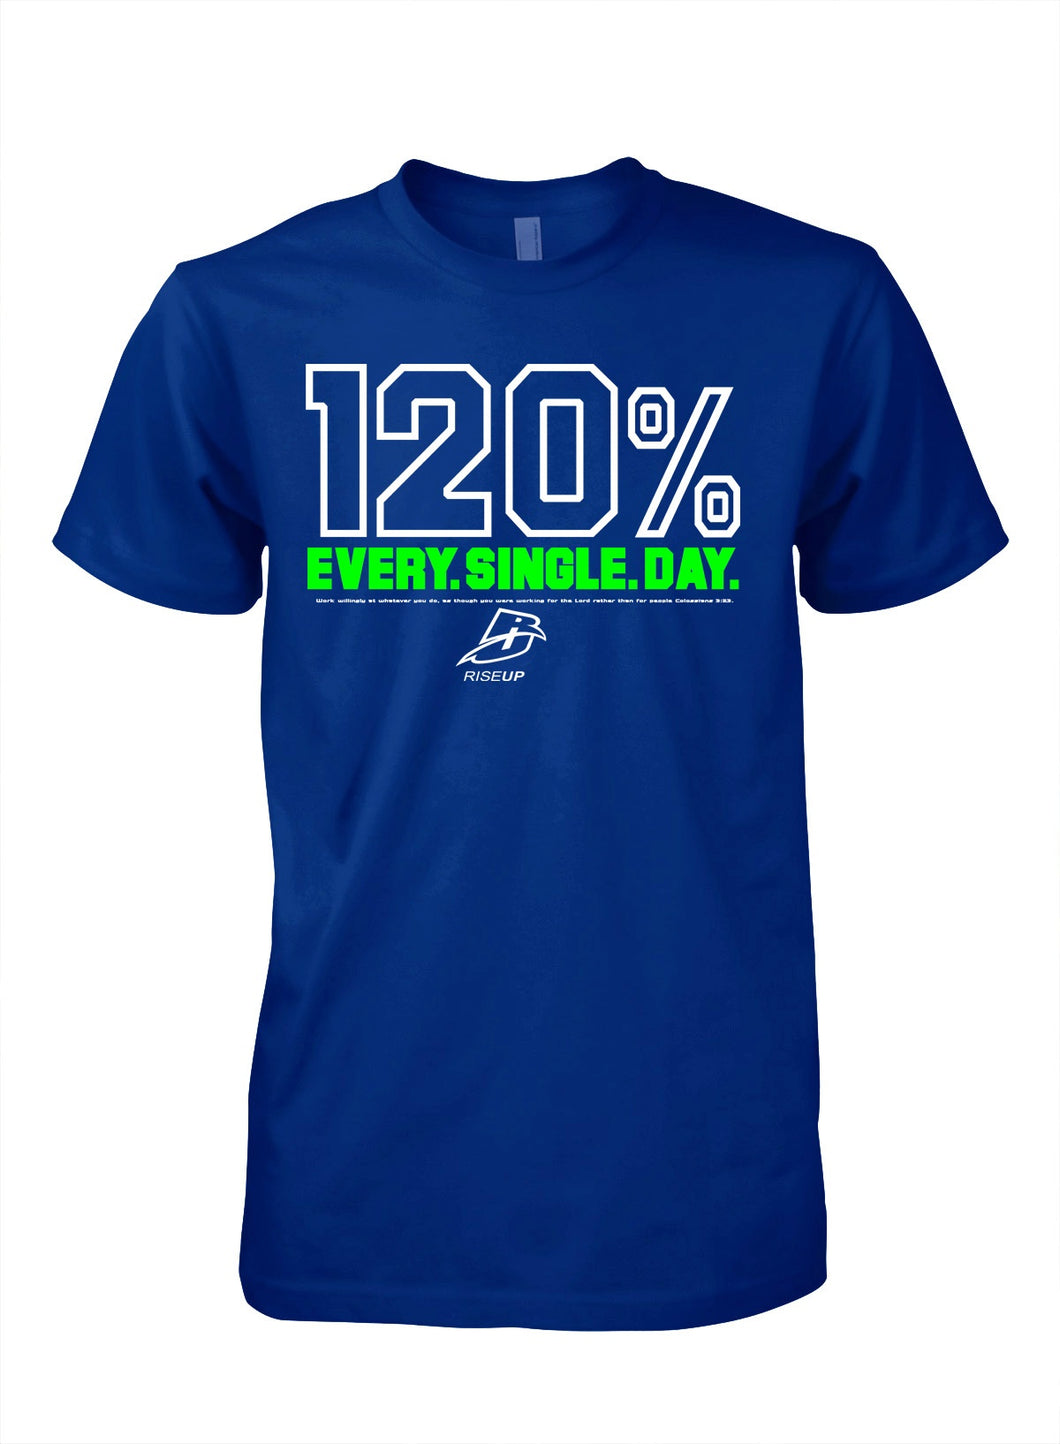 T-Shirt 120% Every Single Day Dry-fit Royal Blue